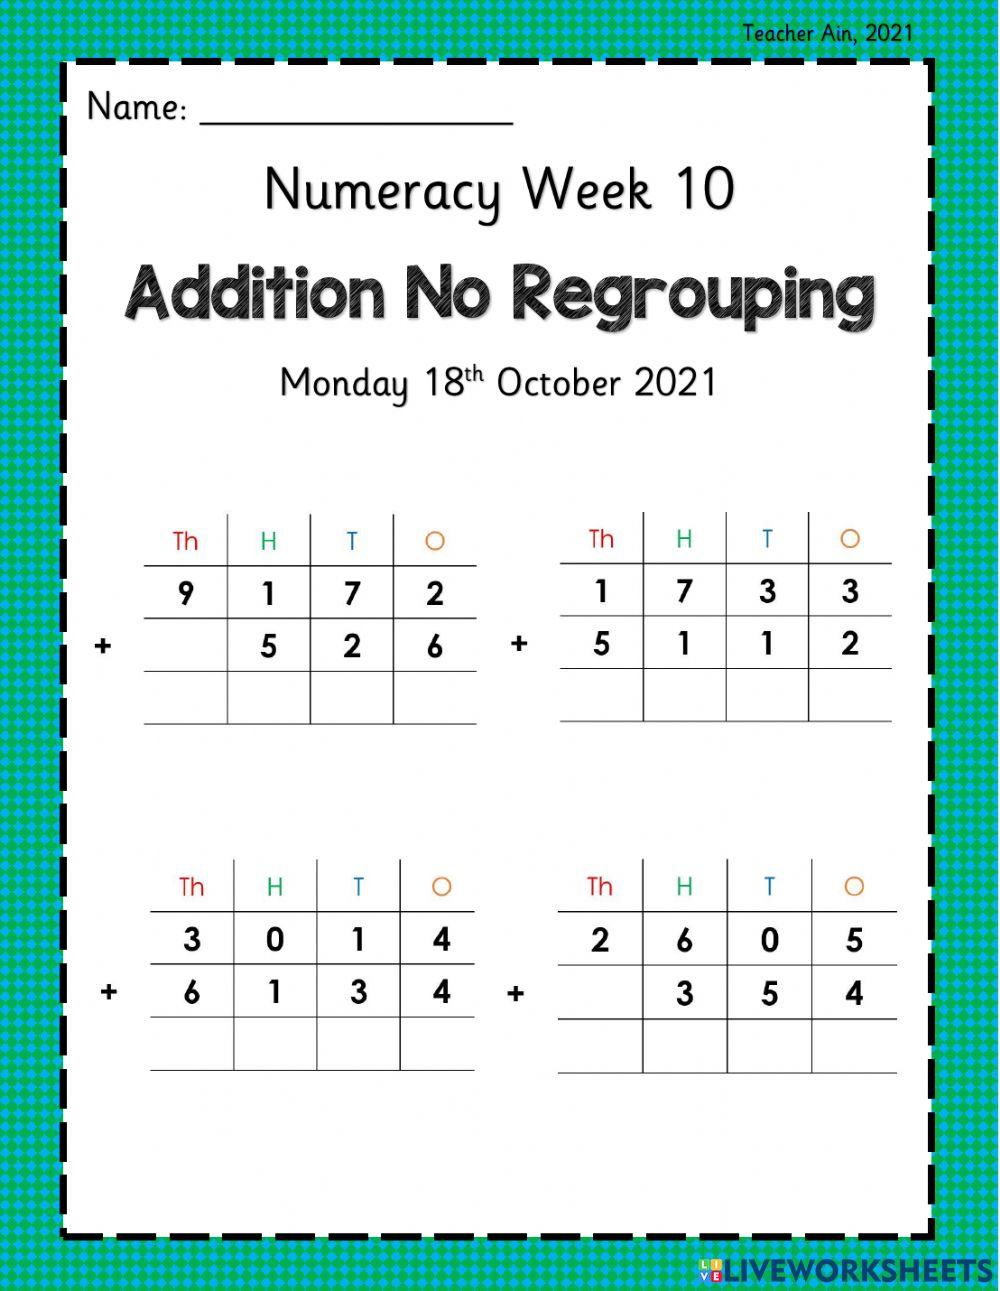 Addition with No Regrouping